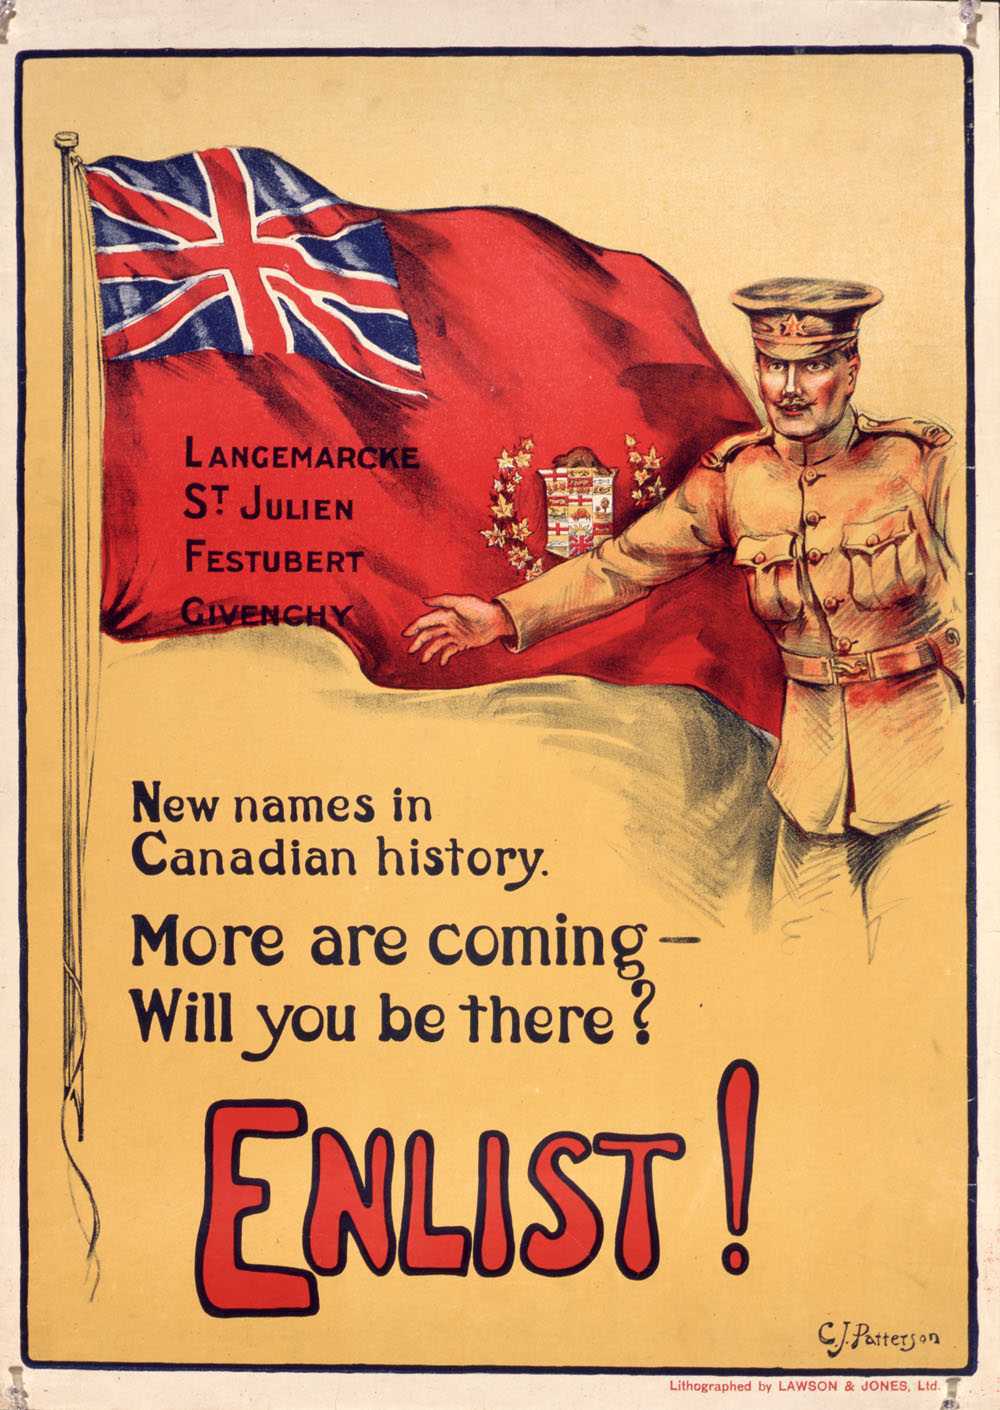 Illustrated poster, colour, English. A soldier reaches his hand across the Union Jack, which is emblazoned with key Canadian battles (Langemarcke, Festubert, St. Julien, Givenchy).